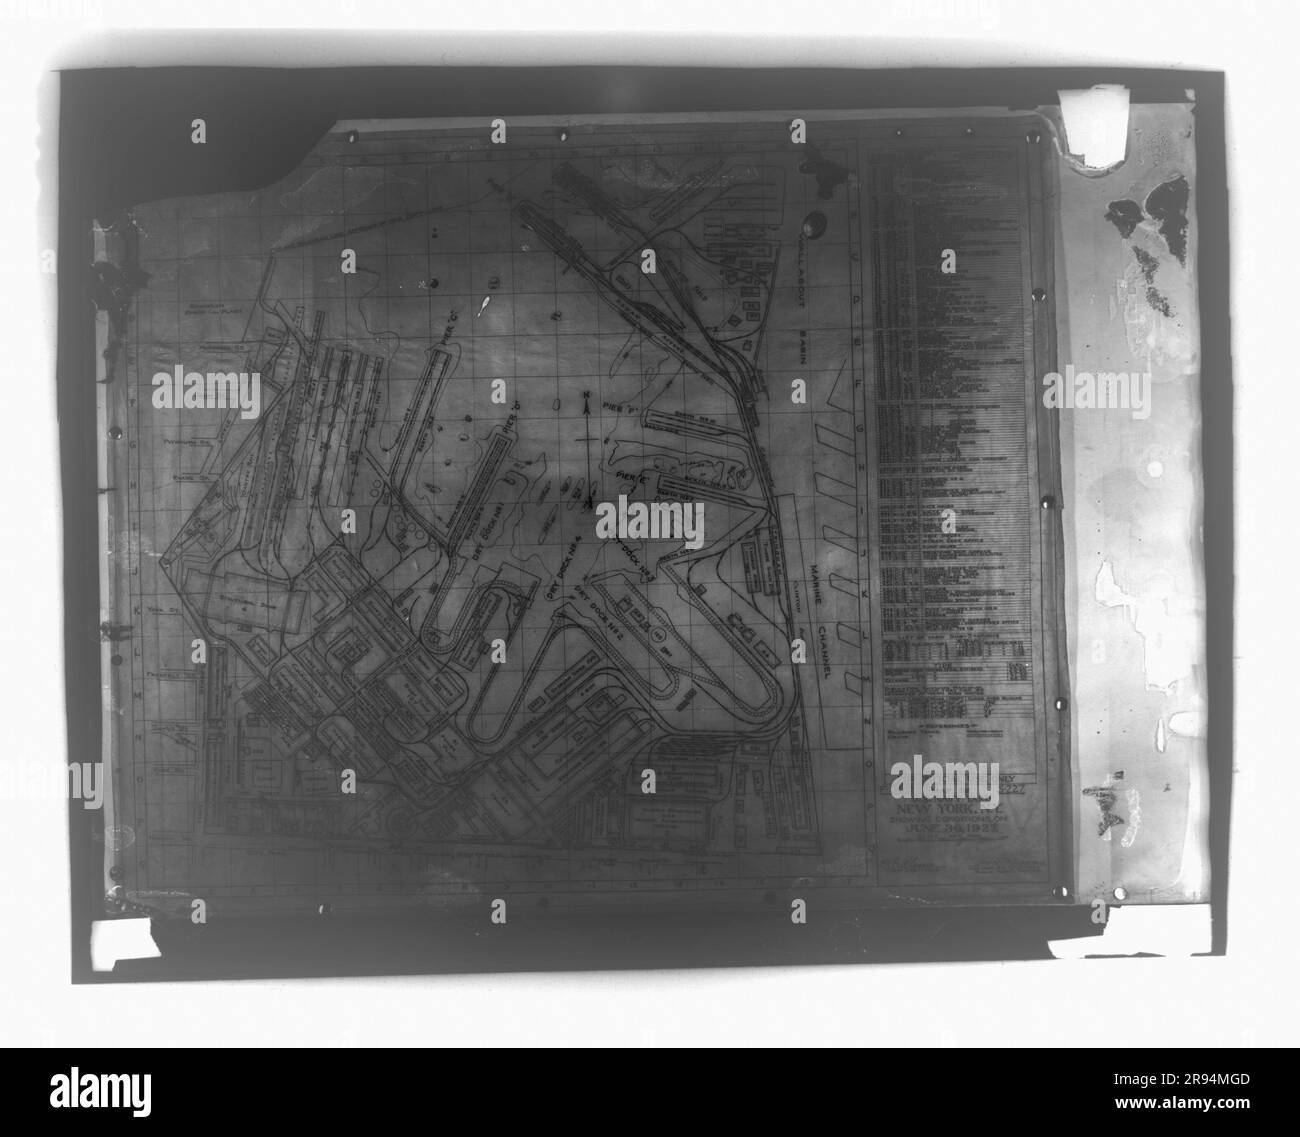 Yard Site Plan with Drawing Content Index. Glass Plate Negatives of the Construction and Repair of Buildings, Facilities, and Vessels at the New York Navy Yard. Stock Photo